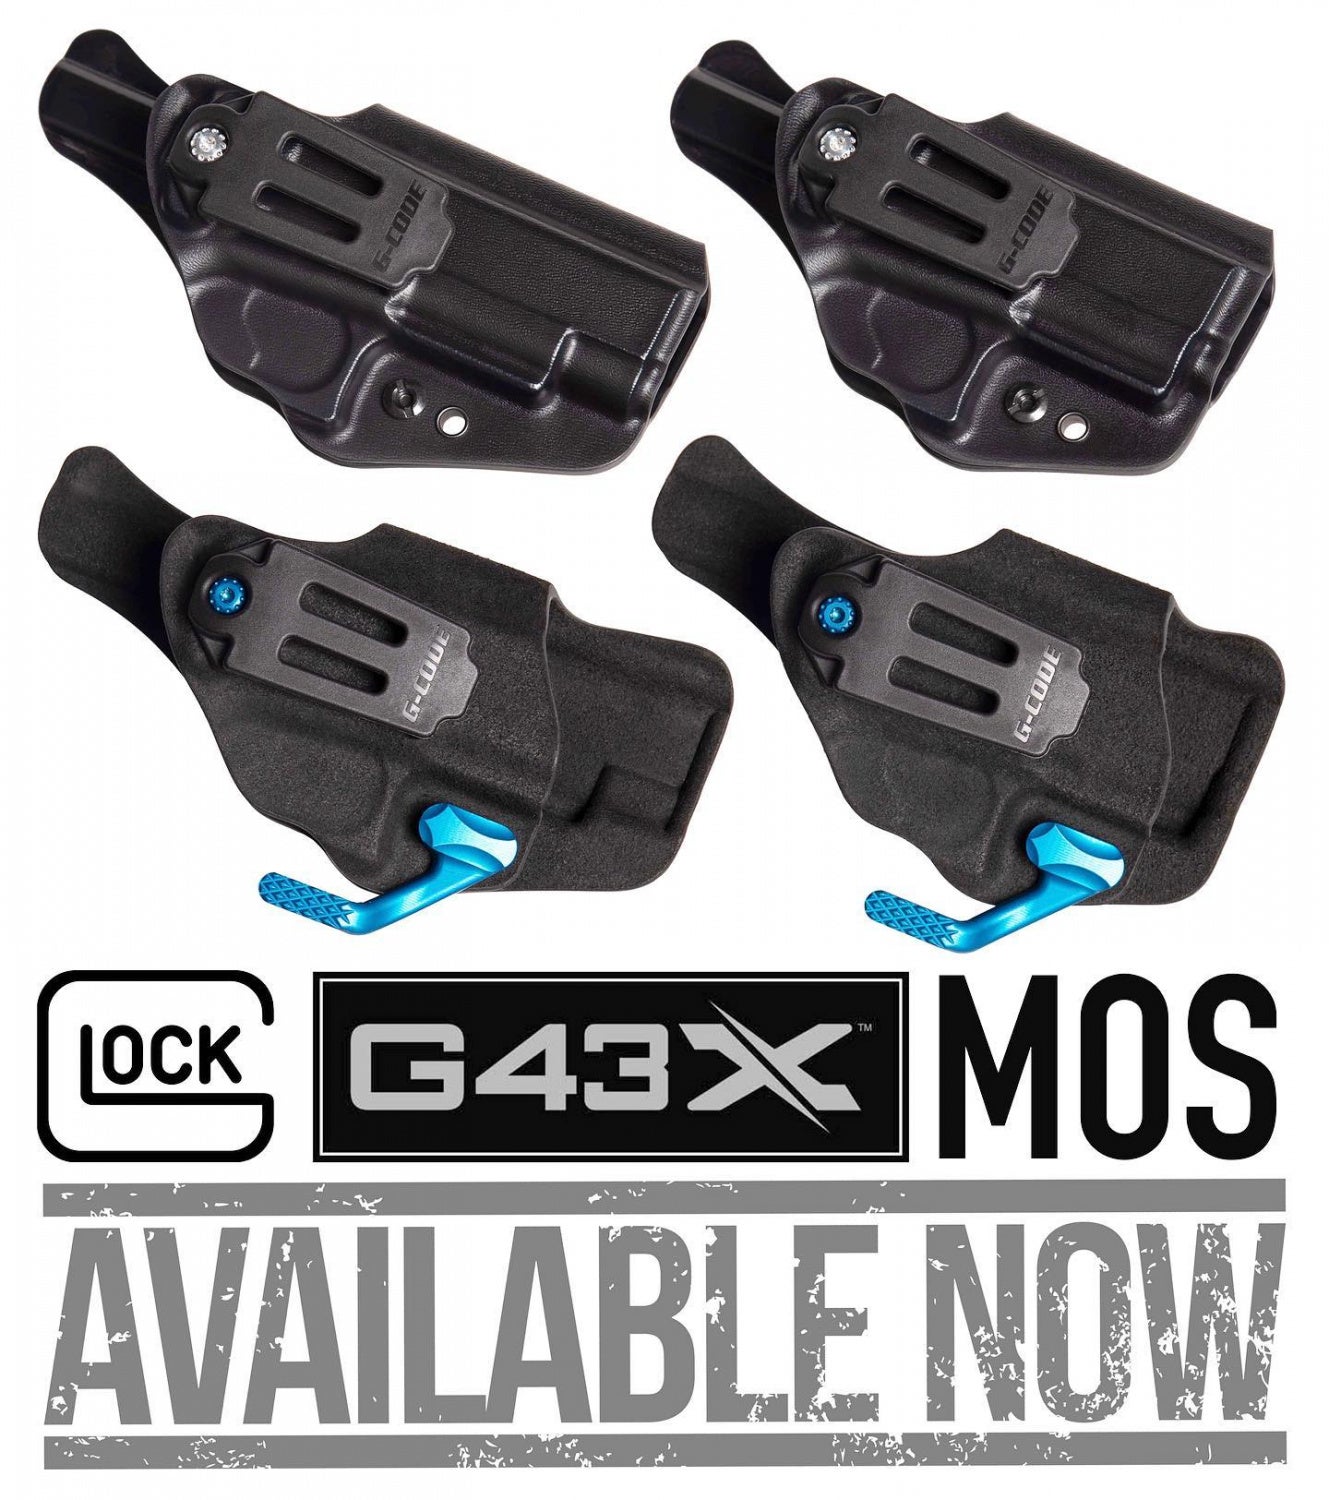 If you want a Phenom holster for your Glock 43X, G-Code has recently added this support.